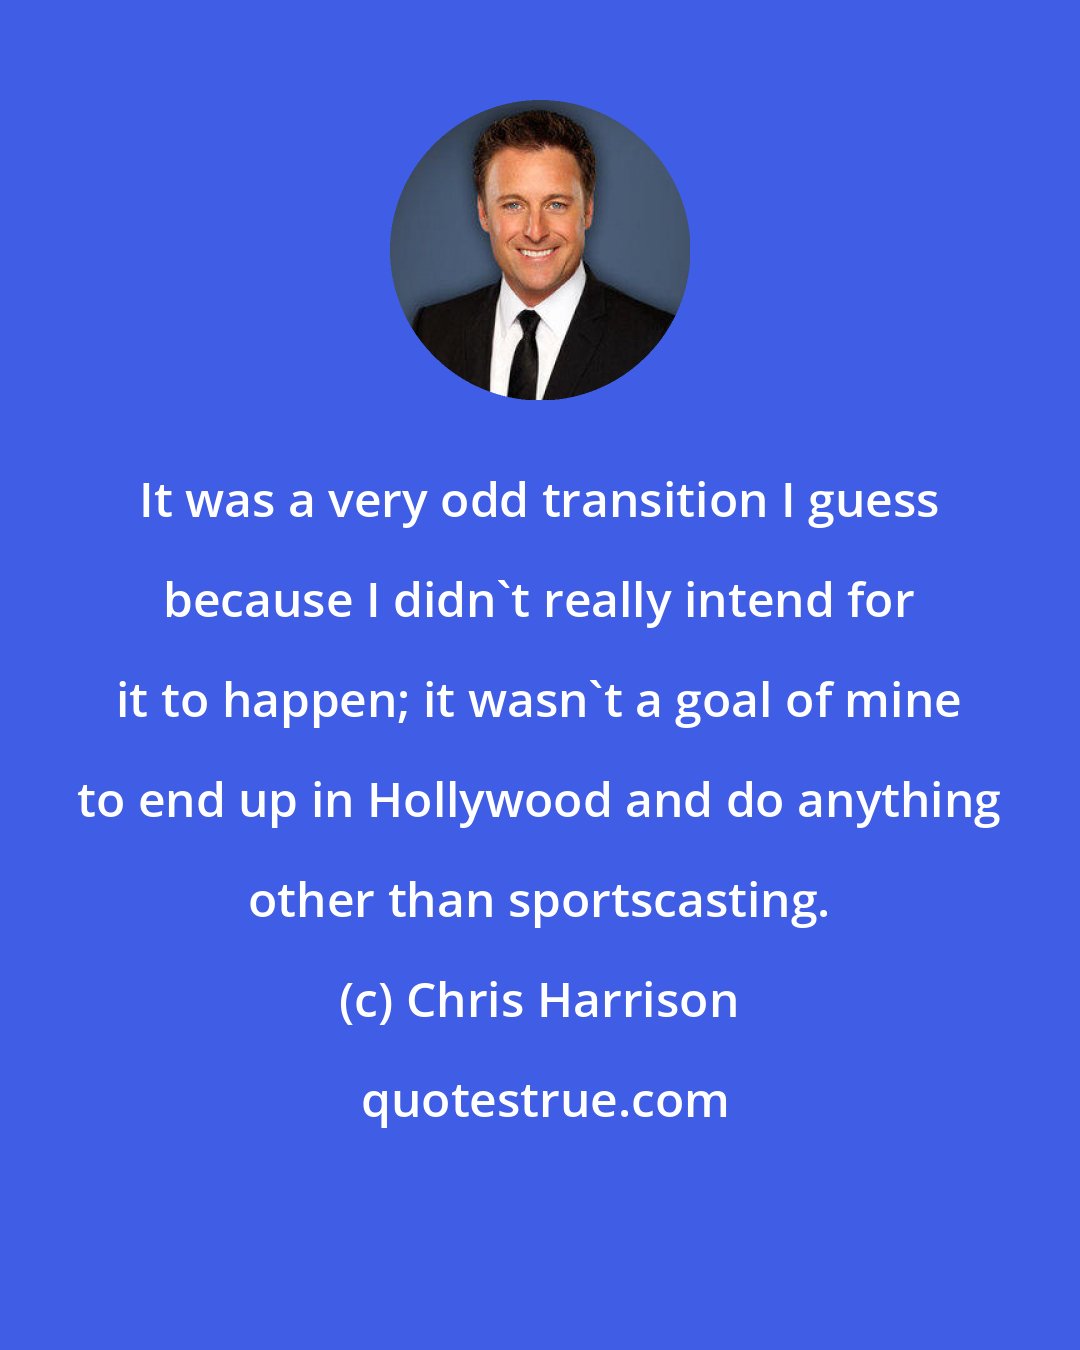 Chris Harrison: It was a very odd transition I guess because I didn't really intend for it to happen; it wasn't a goal of mine to end up in Hollywood and do anything other than sportscasting.